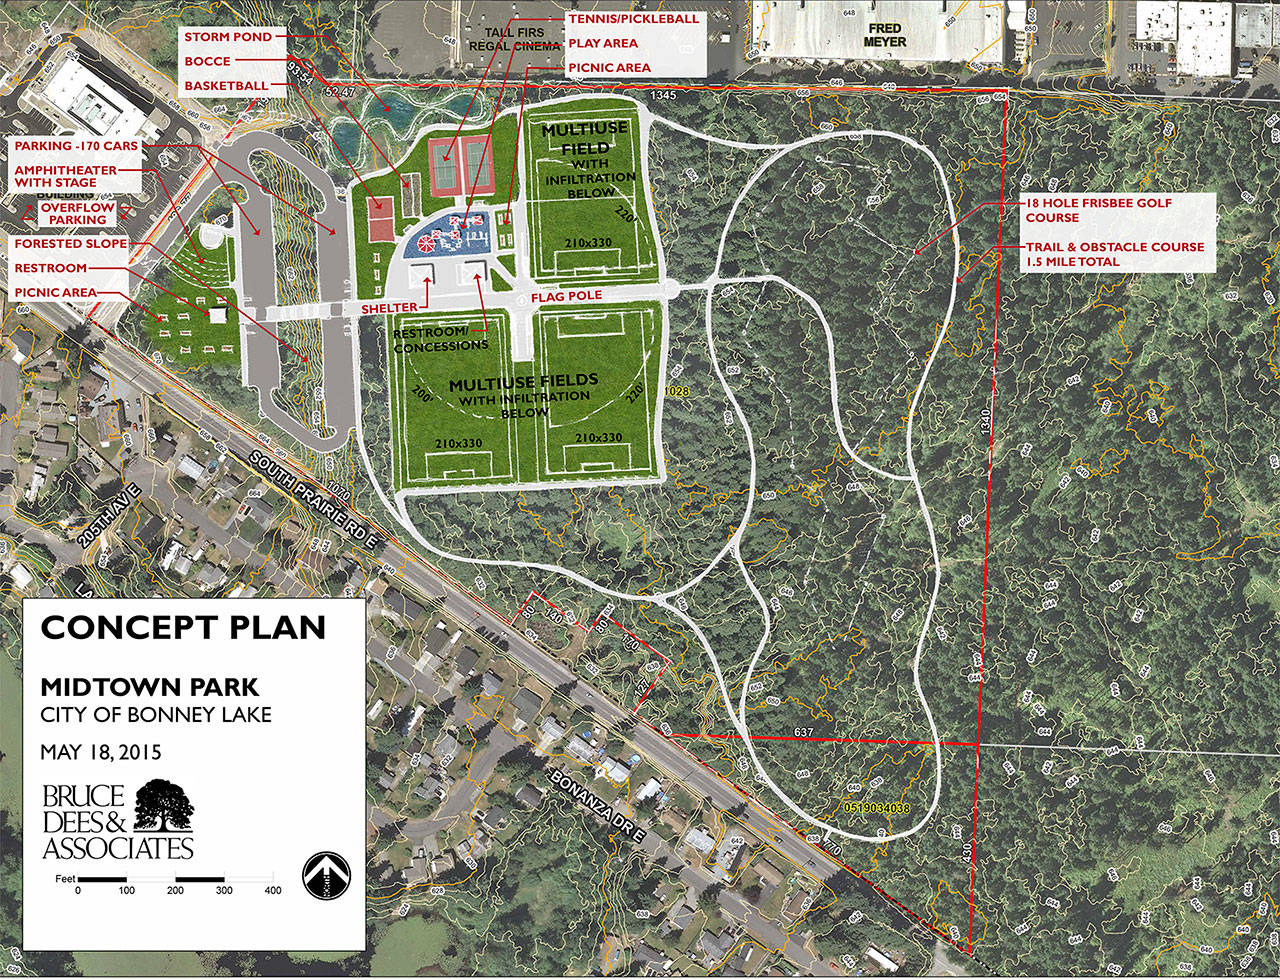 The Bonney Lake City Council passed its most recent Comprehensive Plan in 2015, which included a plan for the Midtown Park in the WSU forest. This plan is not set in stone, and it’s looking a pool will be added to the plan in the future. Image courtesy of Bonney Lake